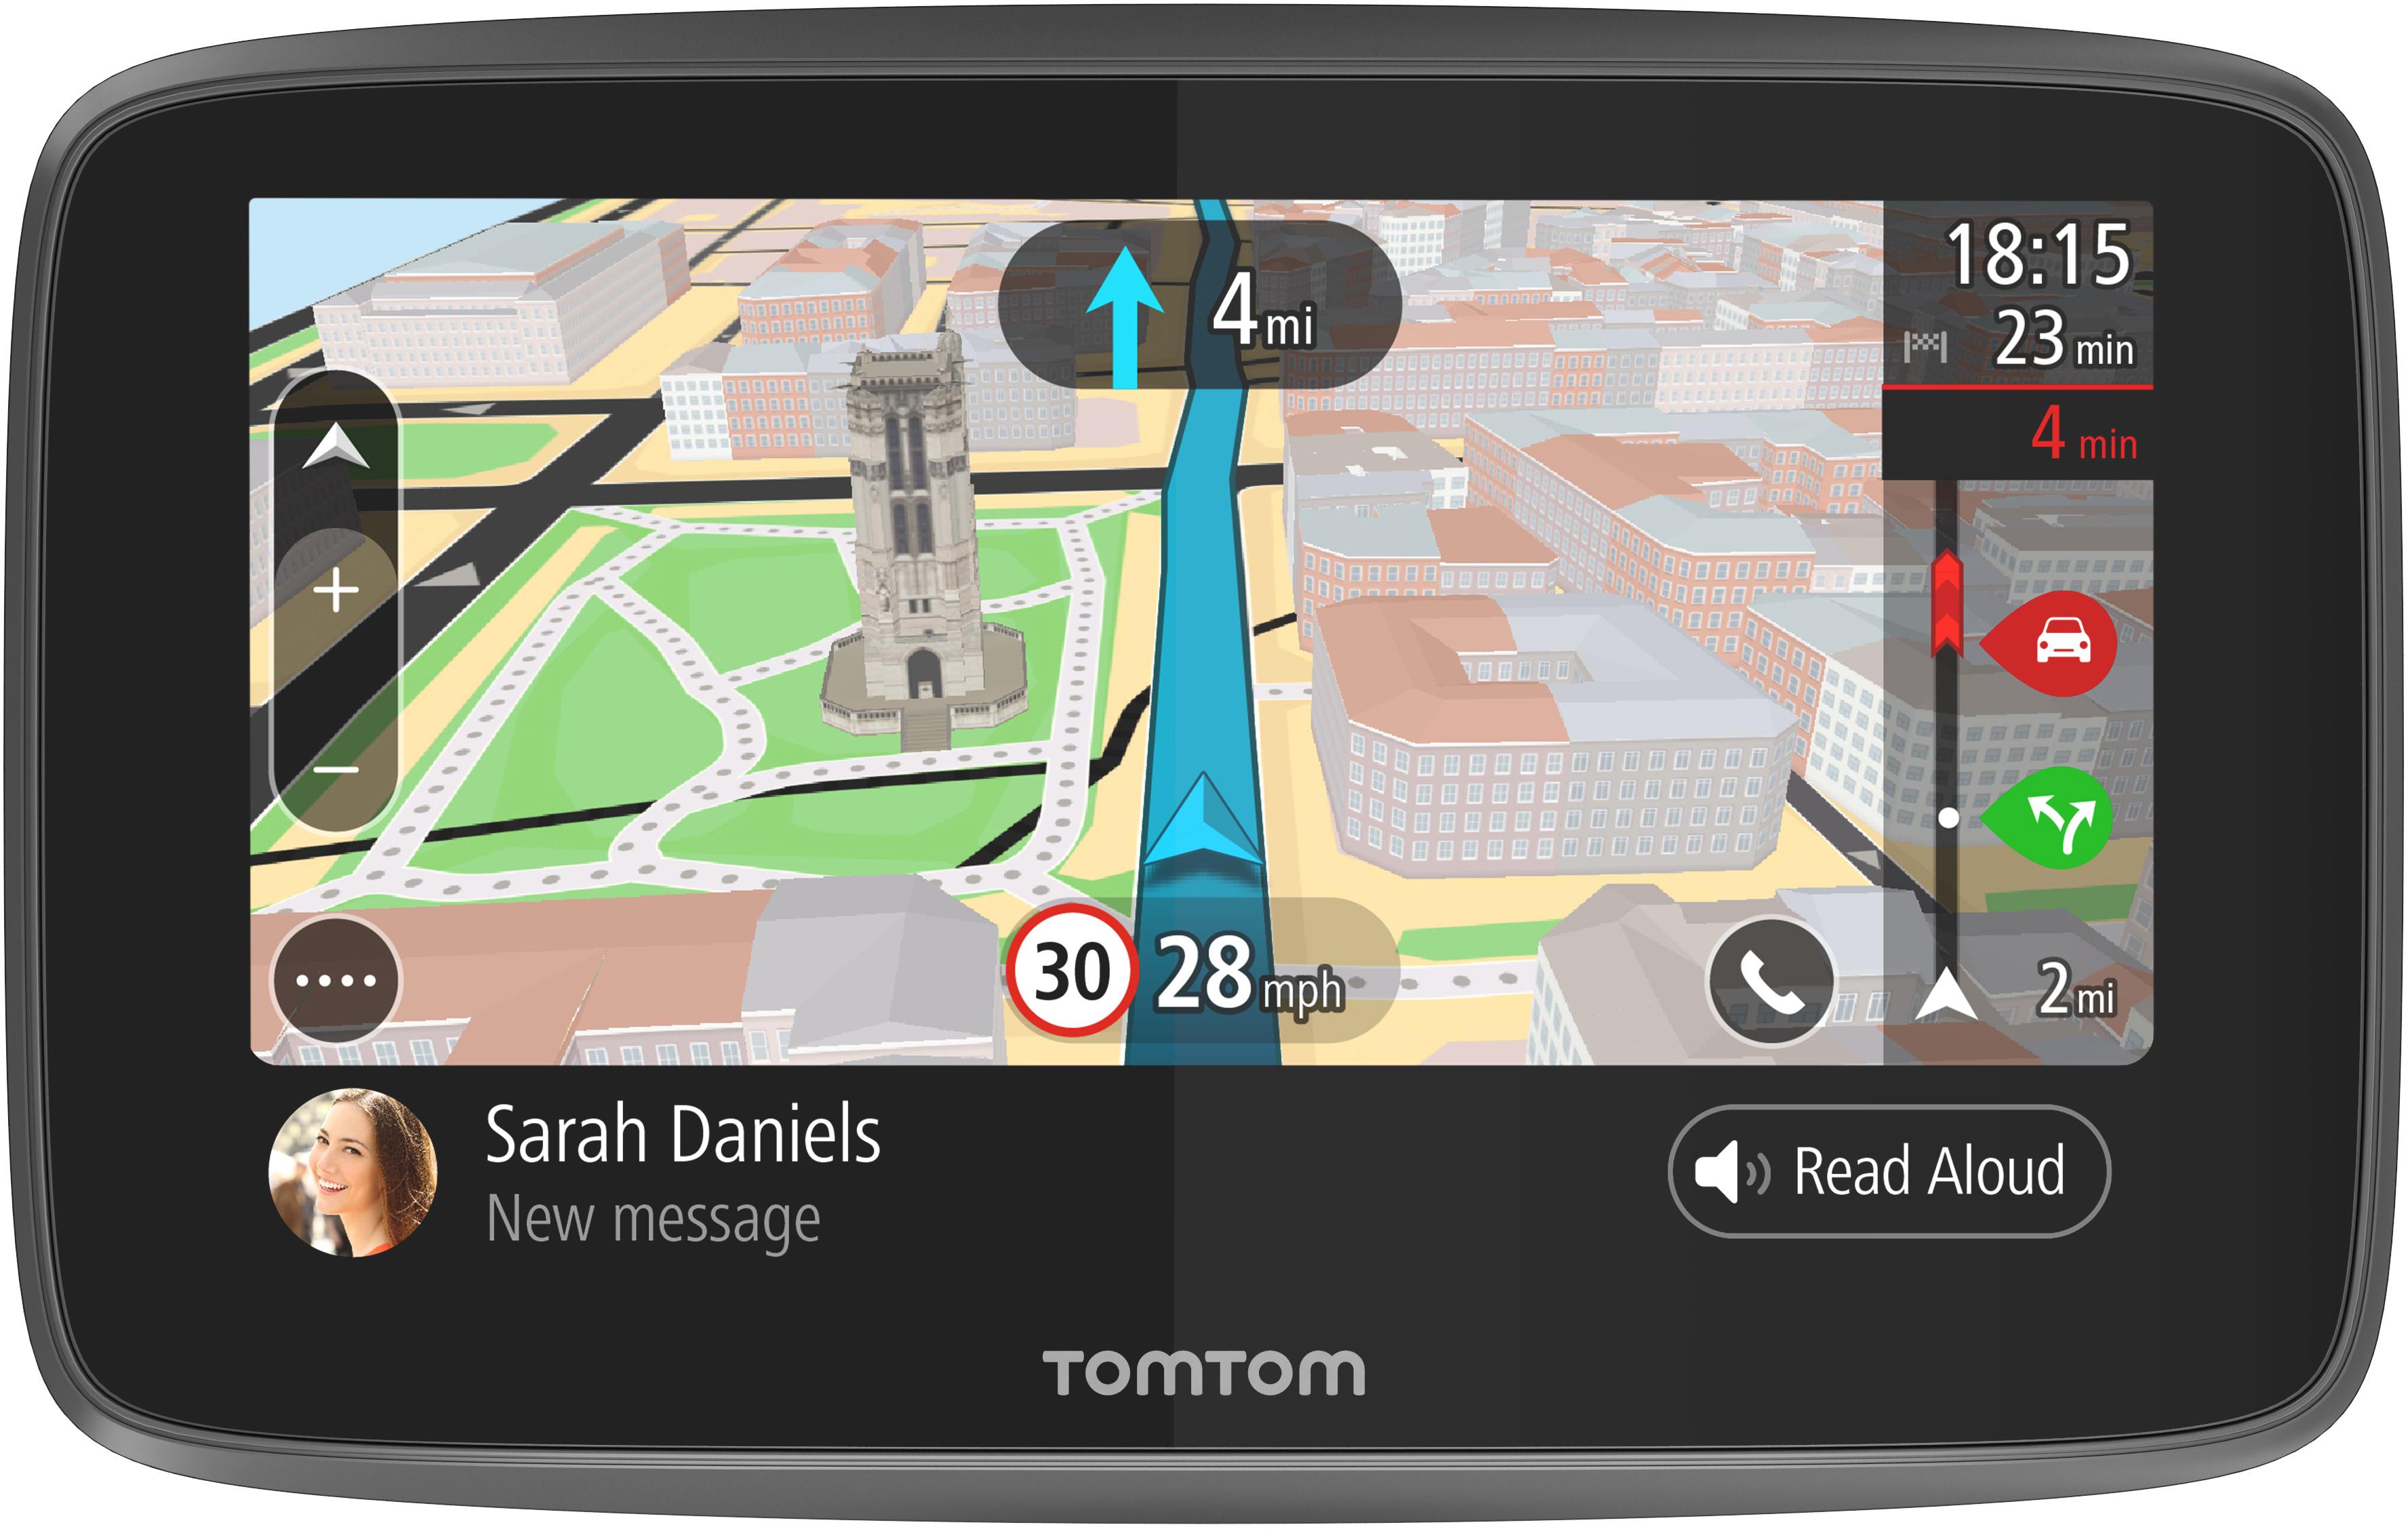 Refurbished Tomtom Go 6200 With Wi-Fi, World Maps And Built In Sim For Tomtom Traffic - Grade B